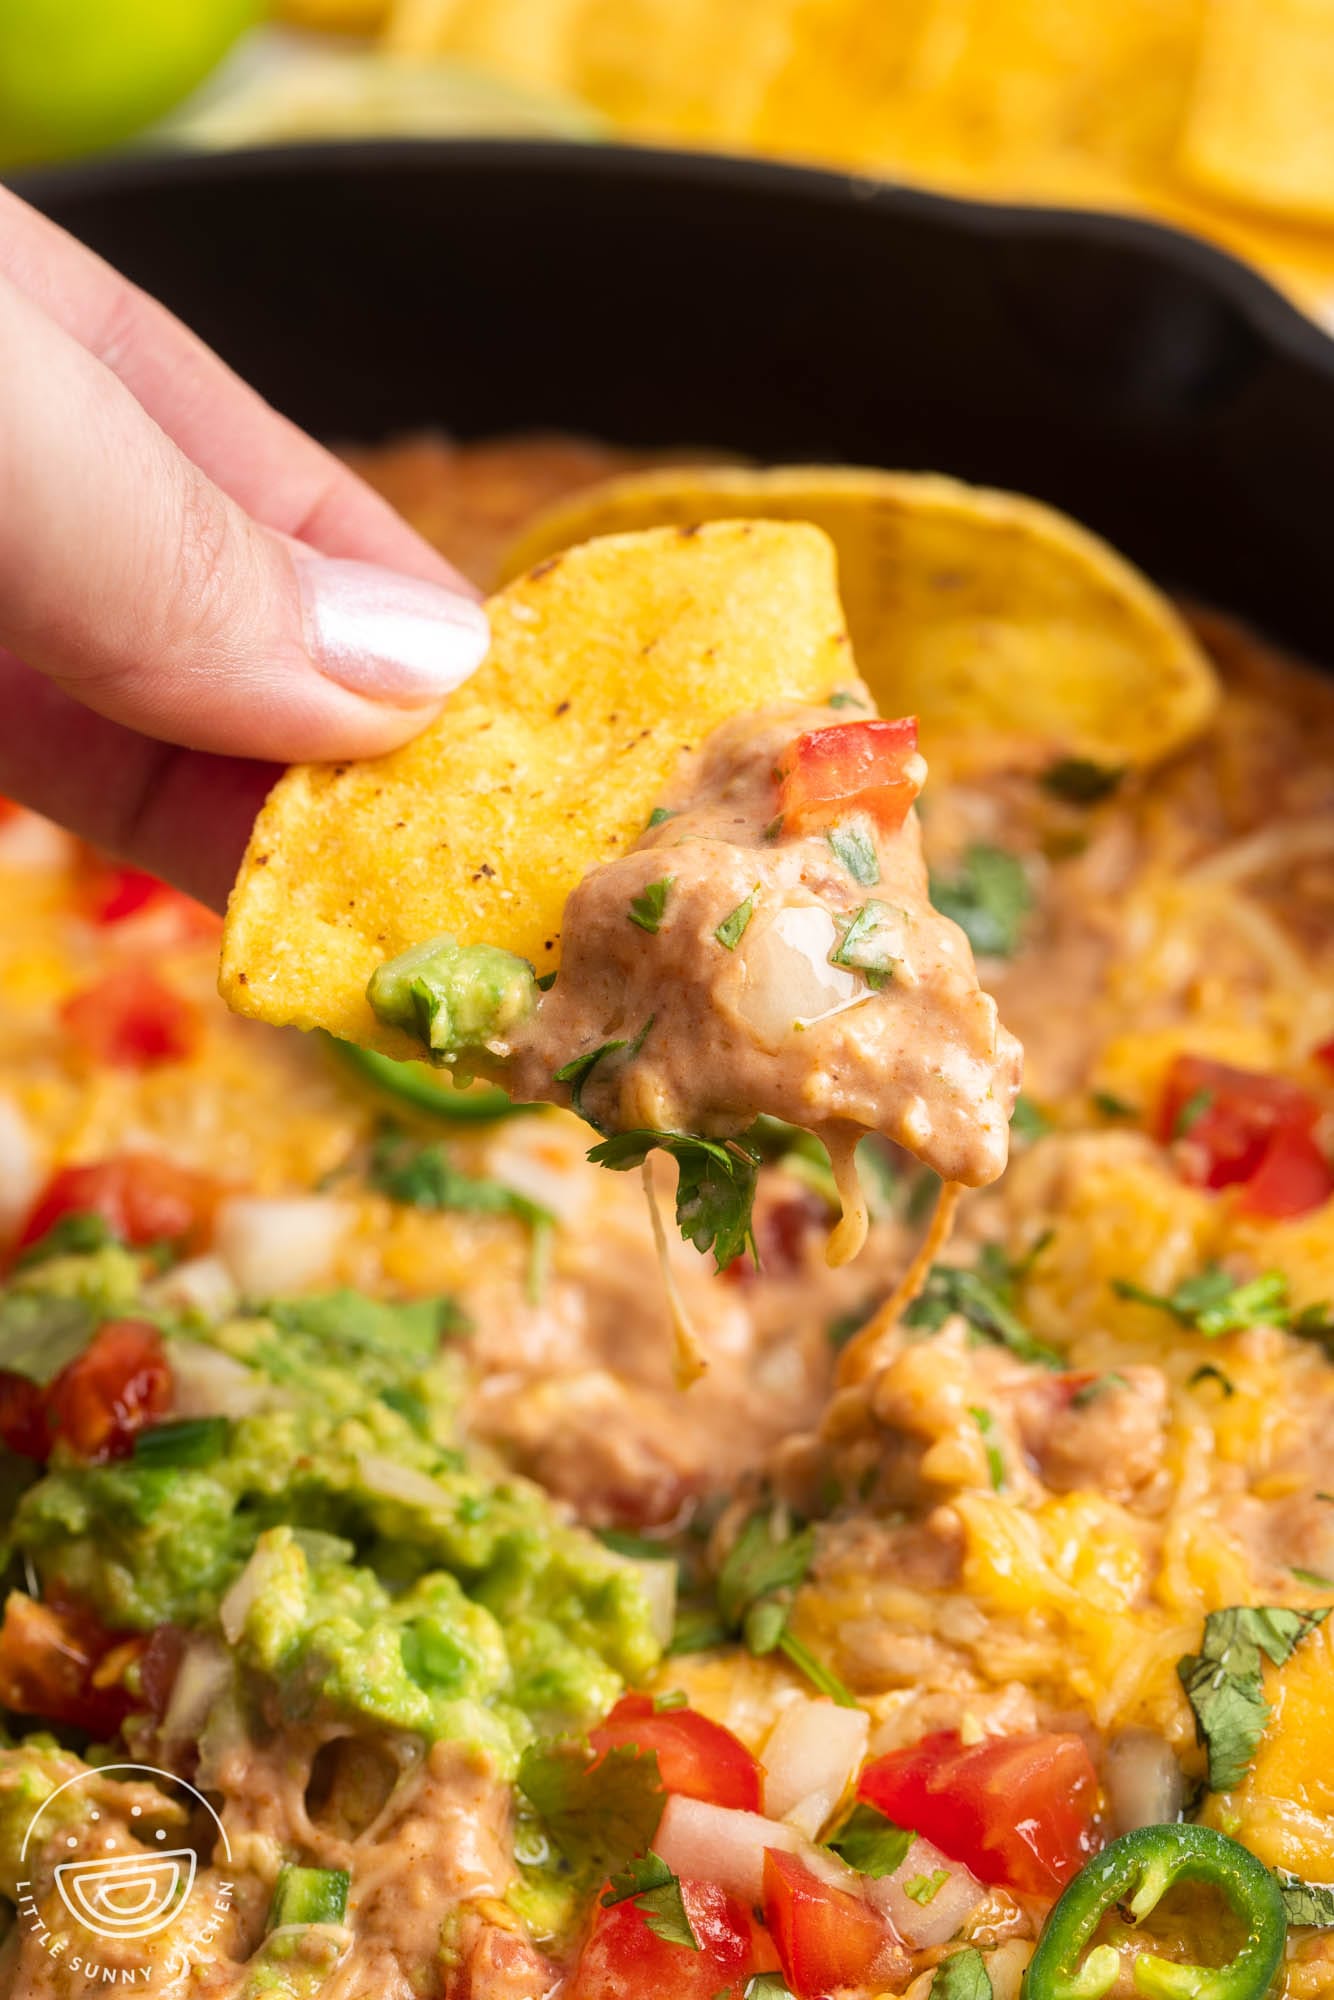 a hand holding a tortilla chip that has been dipped into cream cheese bean dip with pico de gallo and guac.